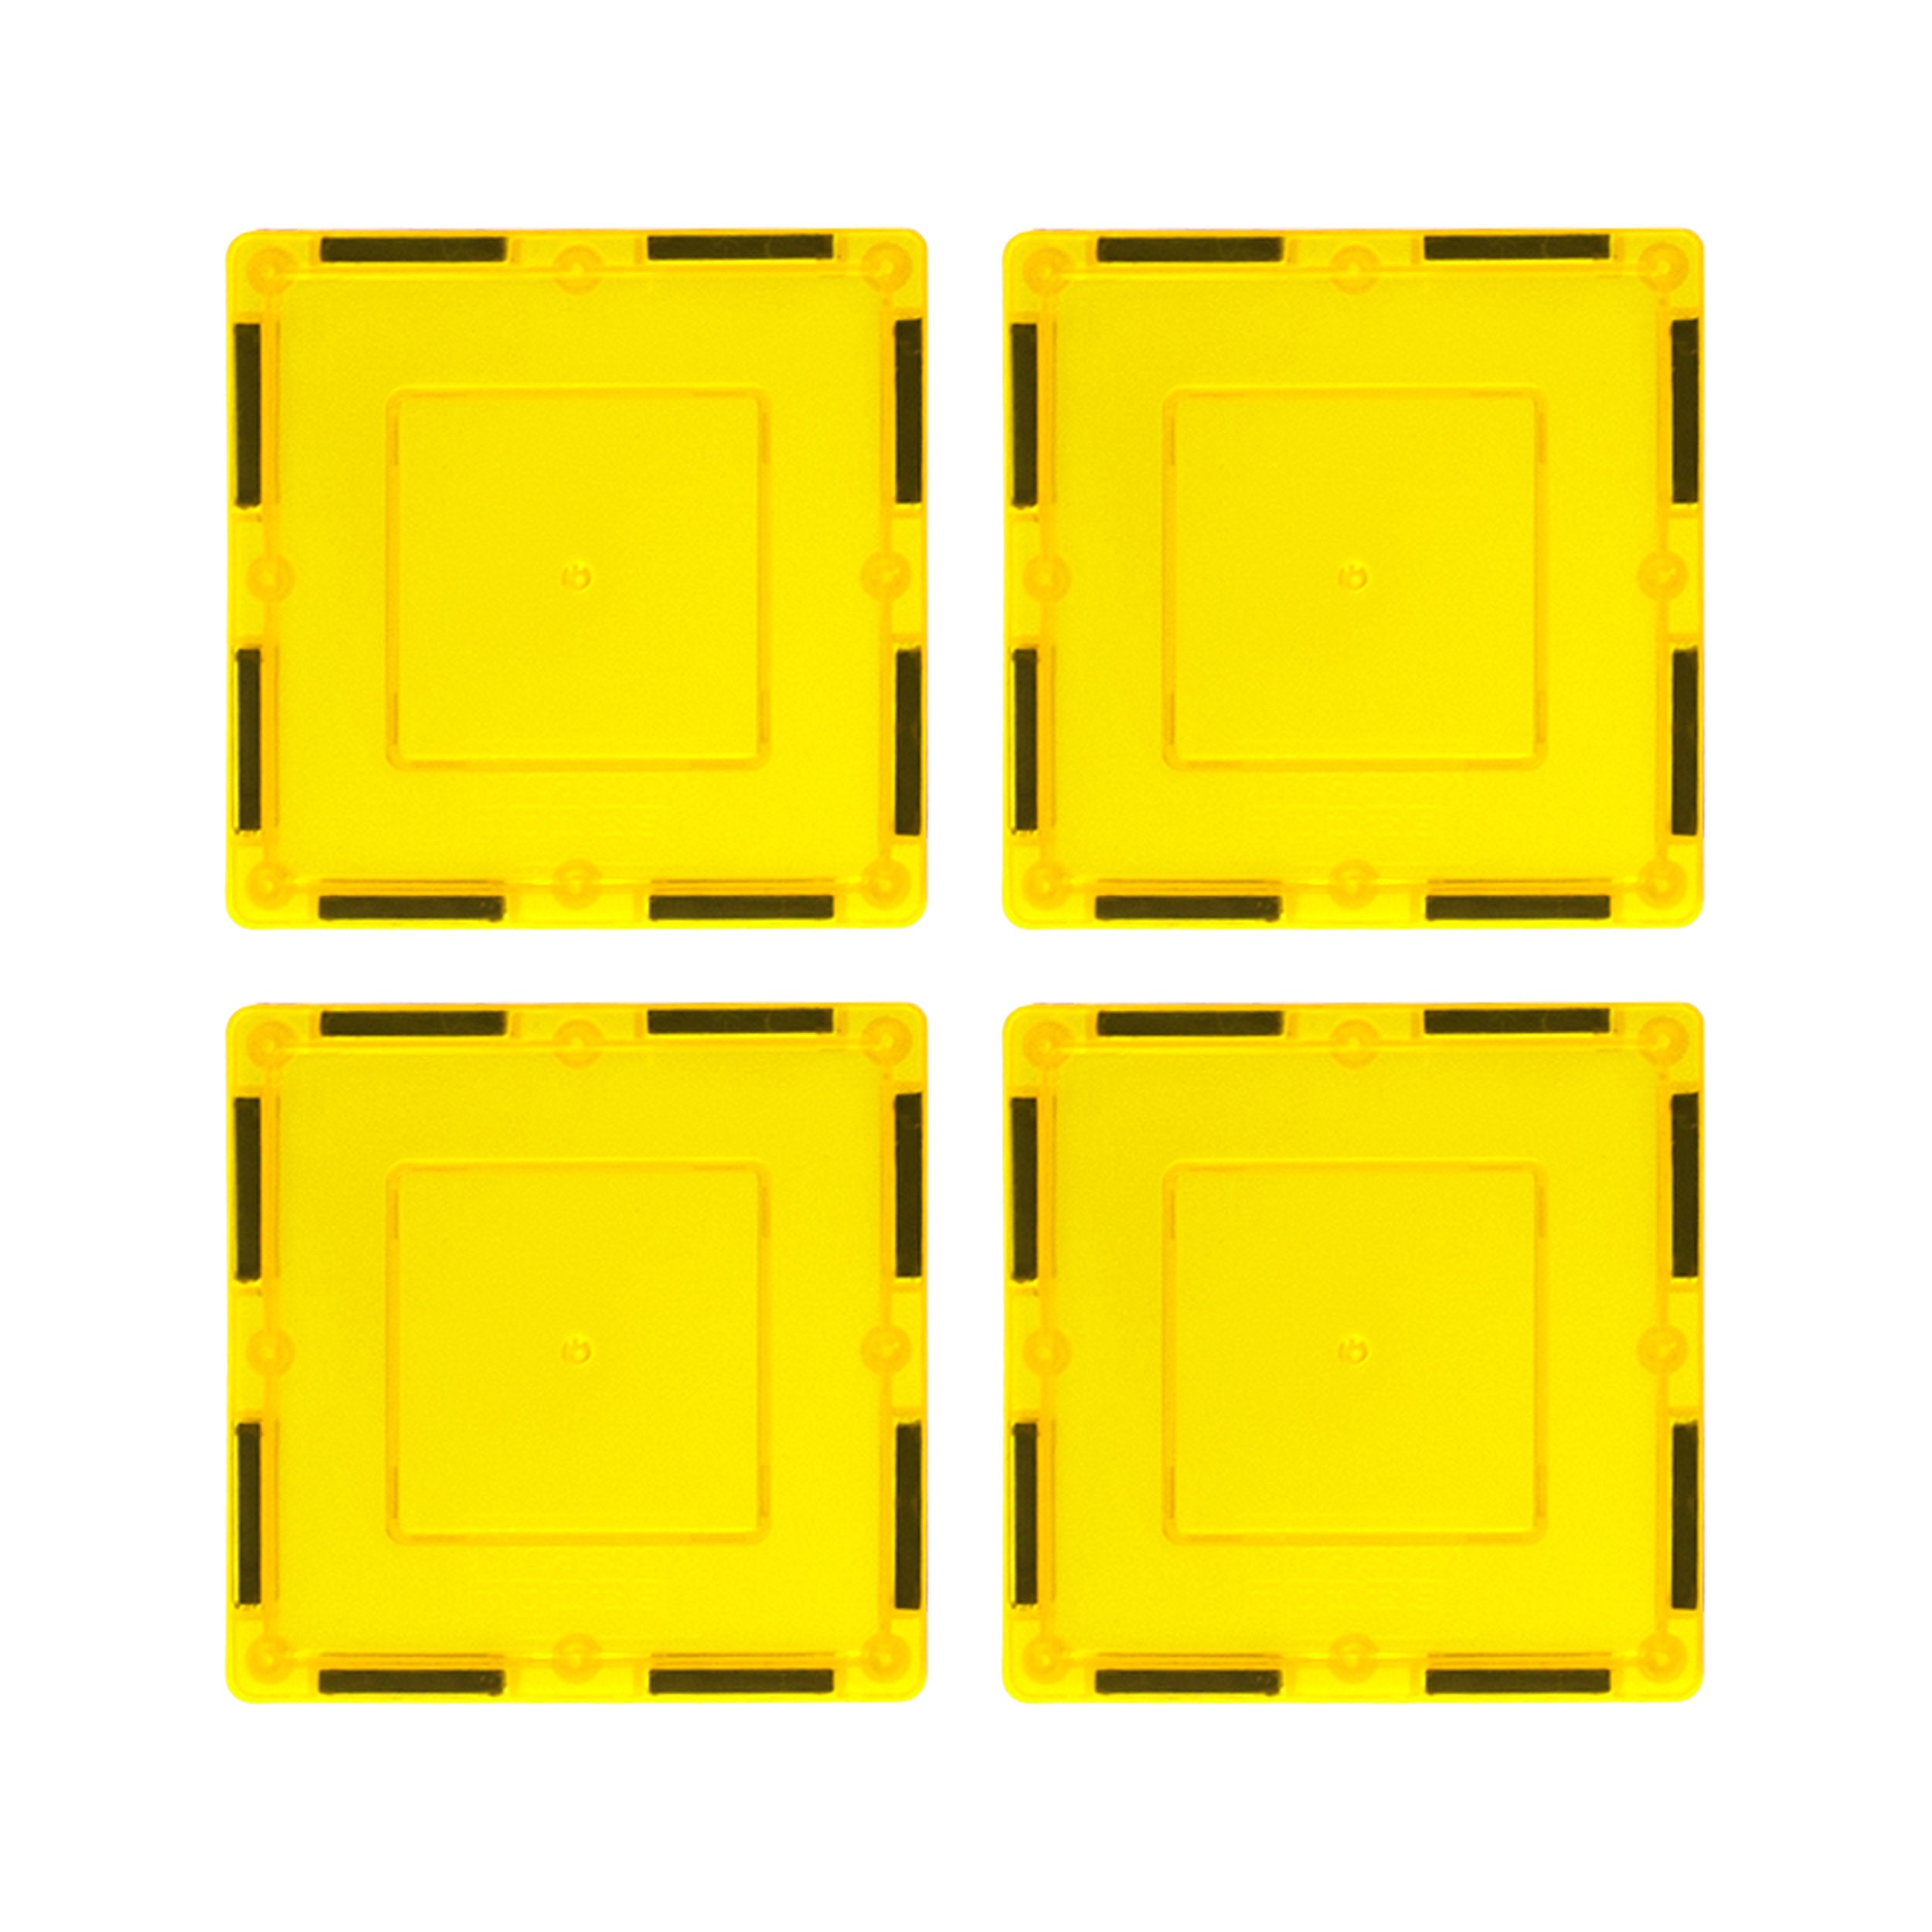 PicassoTiles 4 Piece 3" x 3" Yellow Square Magnetic Tiles